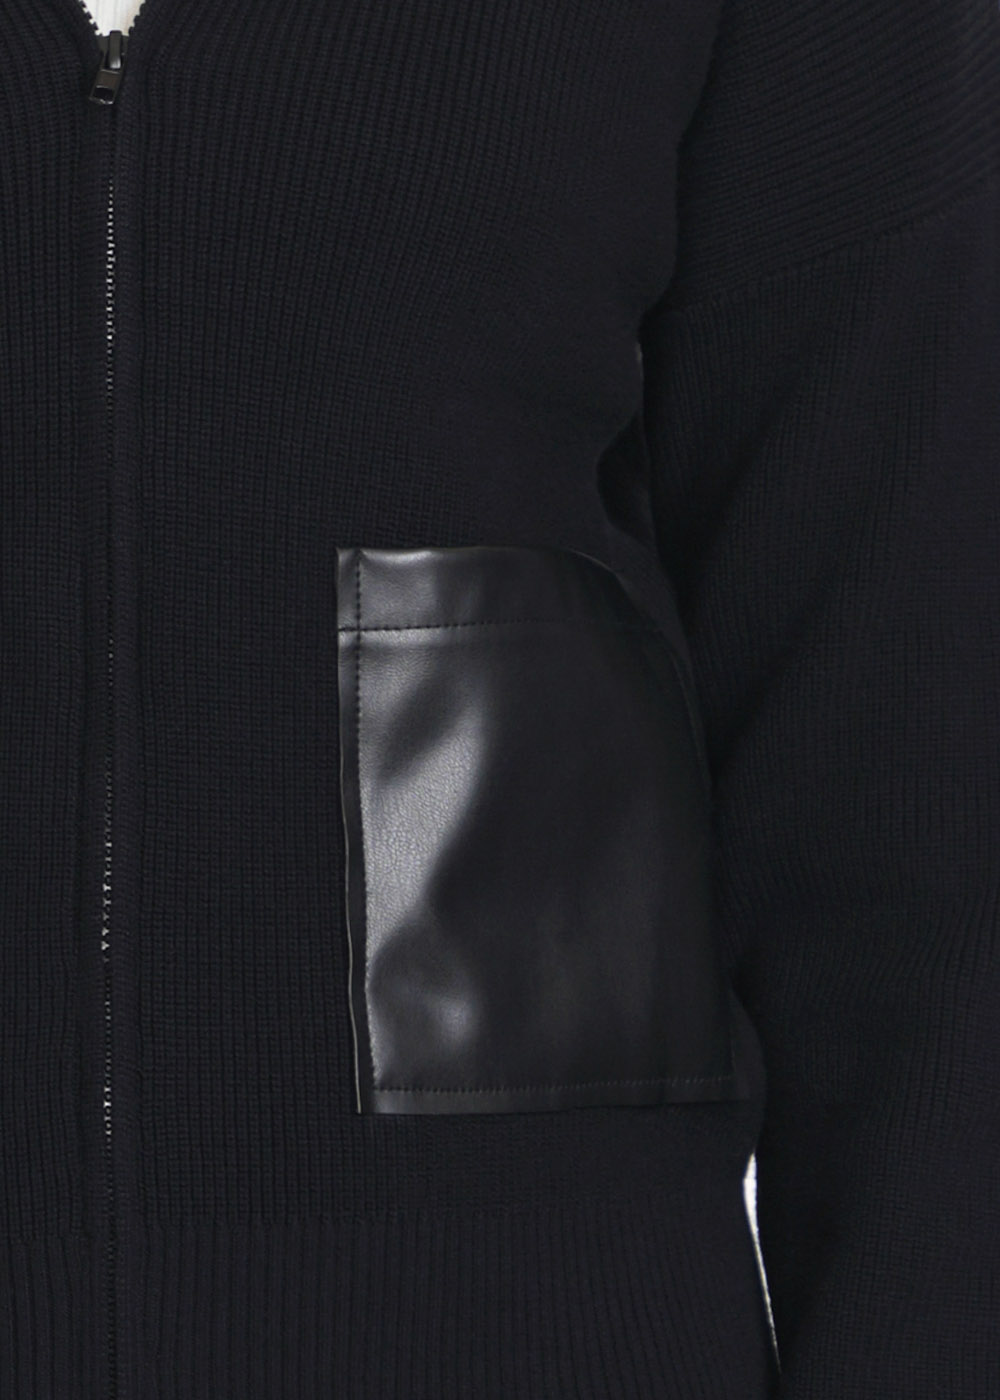 Essence of Style: Black Knit with Leather Hints